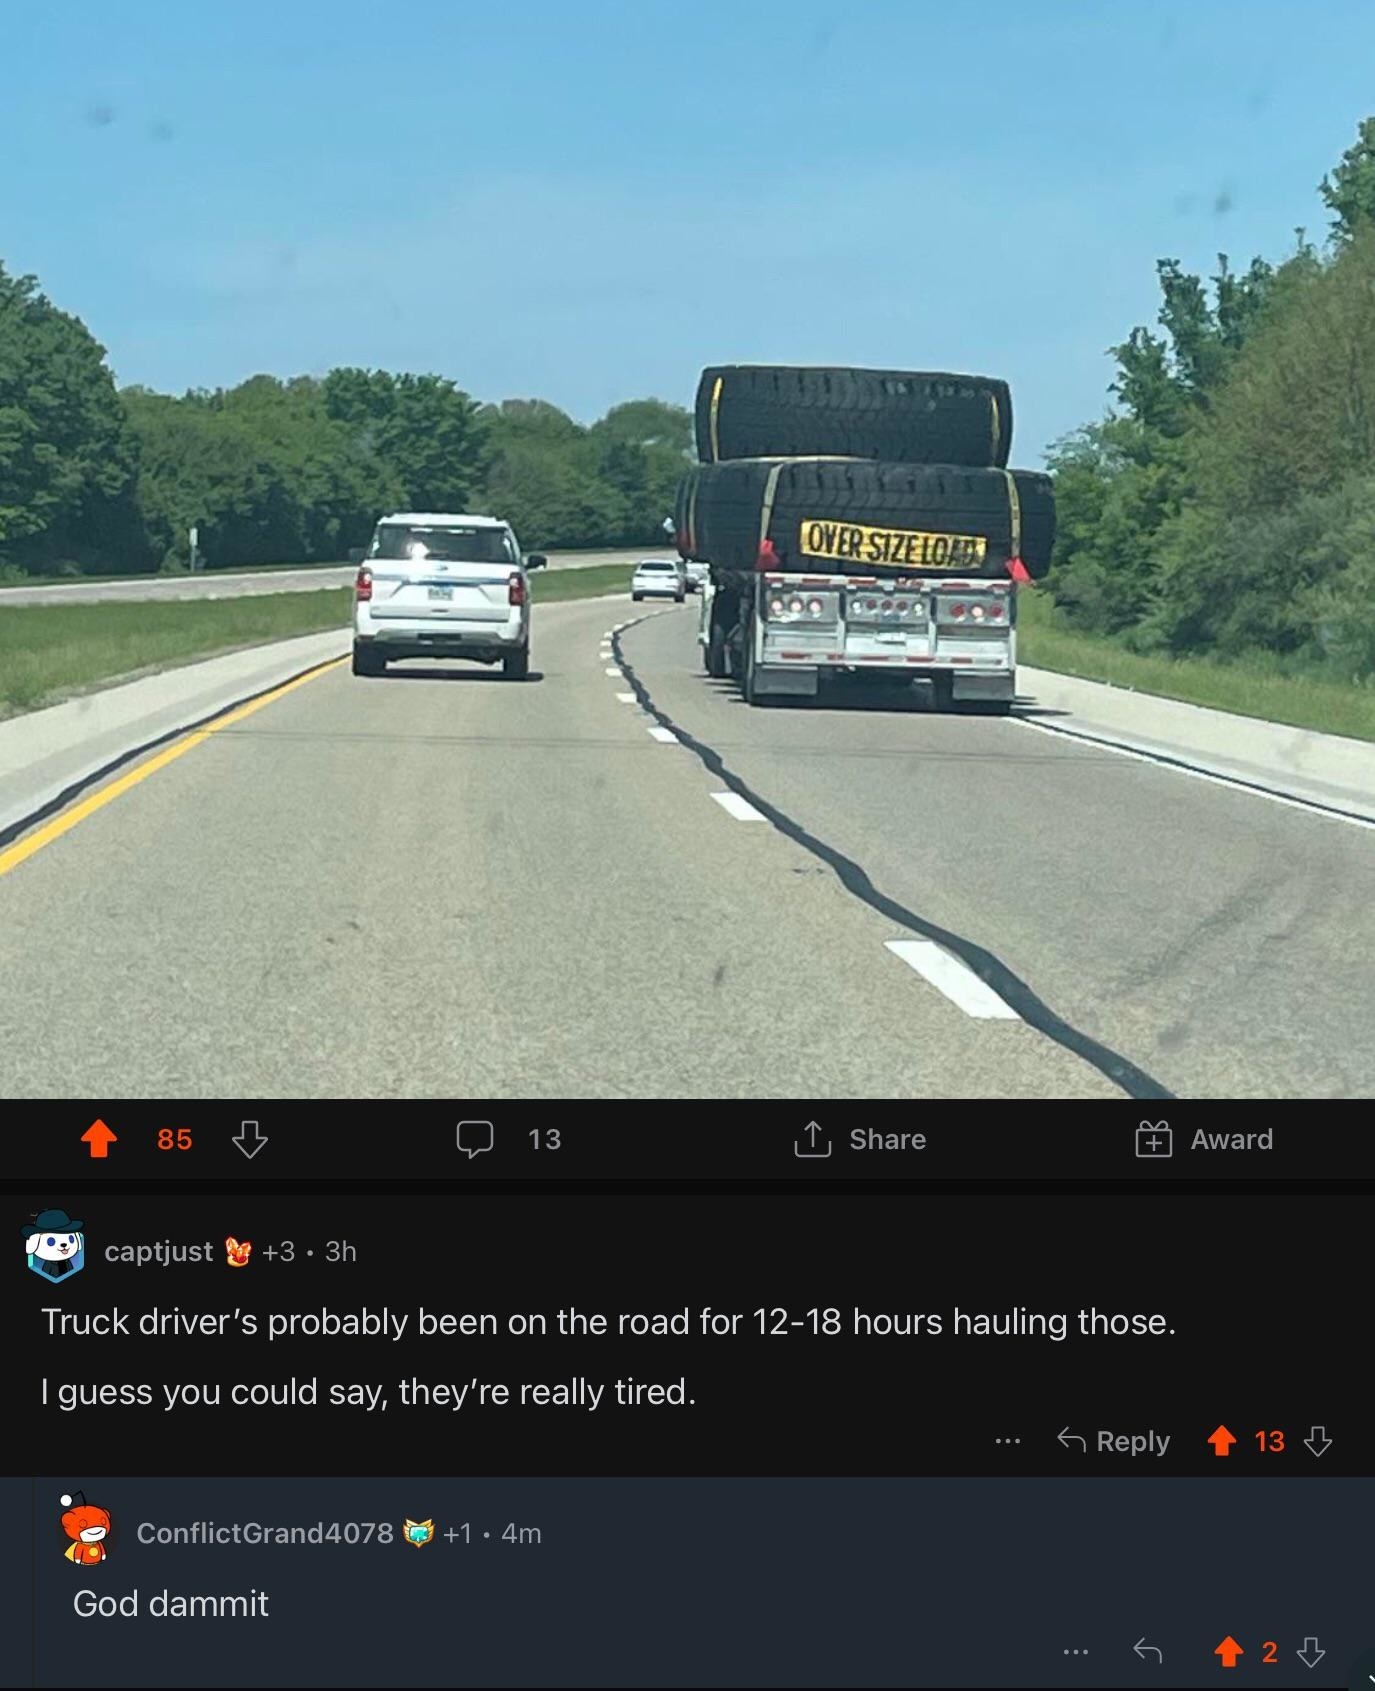 A truck carrying two enormous tires on the highway, with comment &quot;Truck driver&#x27;s probably been on the road for 12-18 hours hauling those; I guess you could say they&#x27;re really tired&quot; and person comments &quot;Goddamnit&quot;